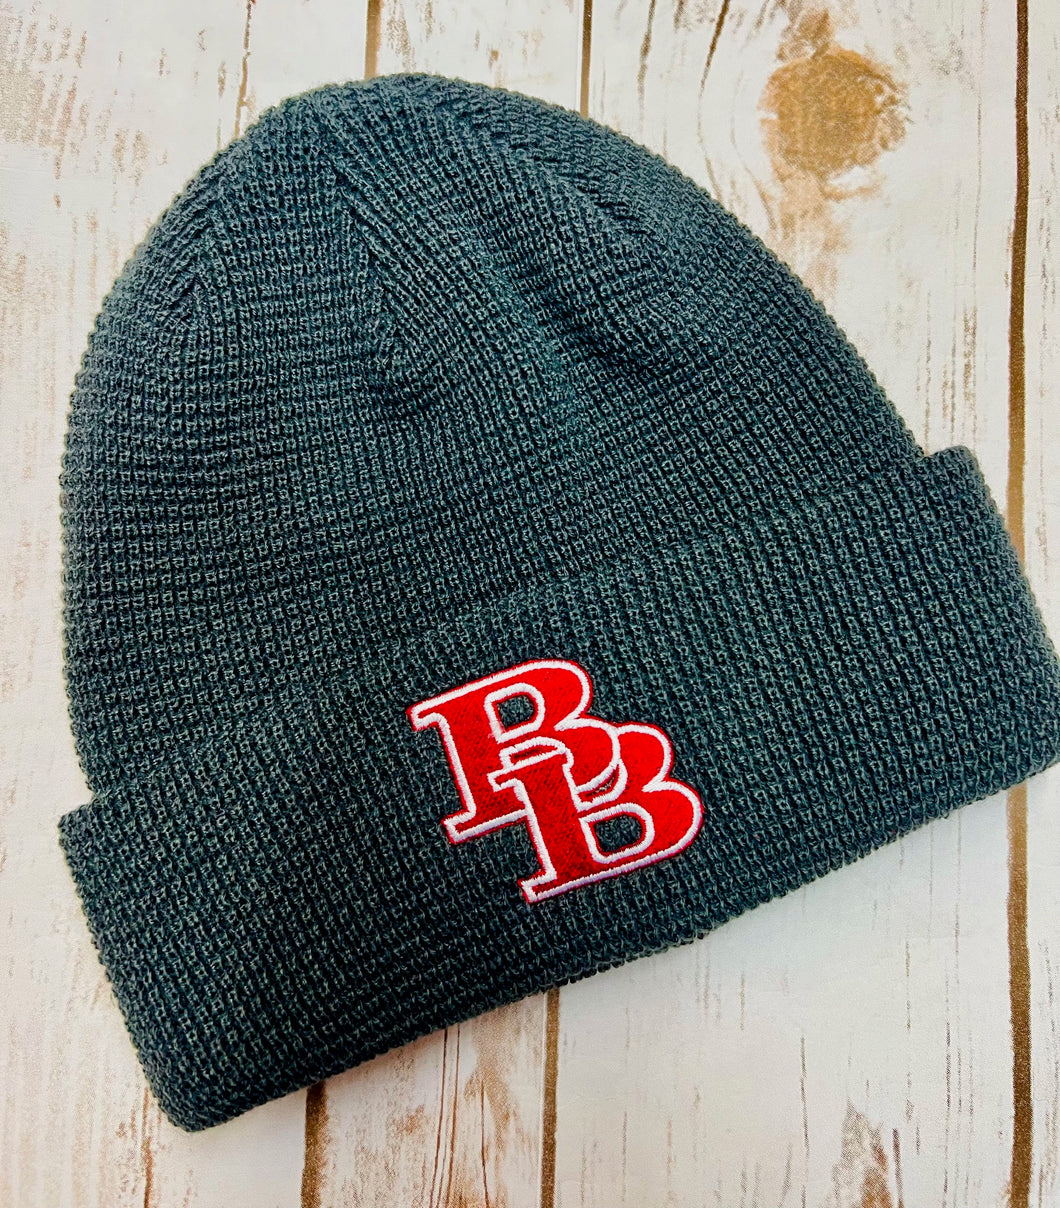 Thermal knit beanie